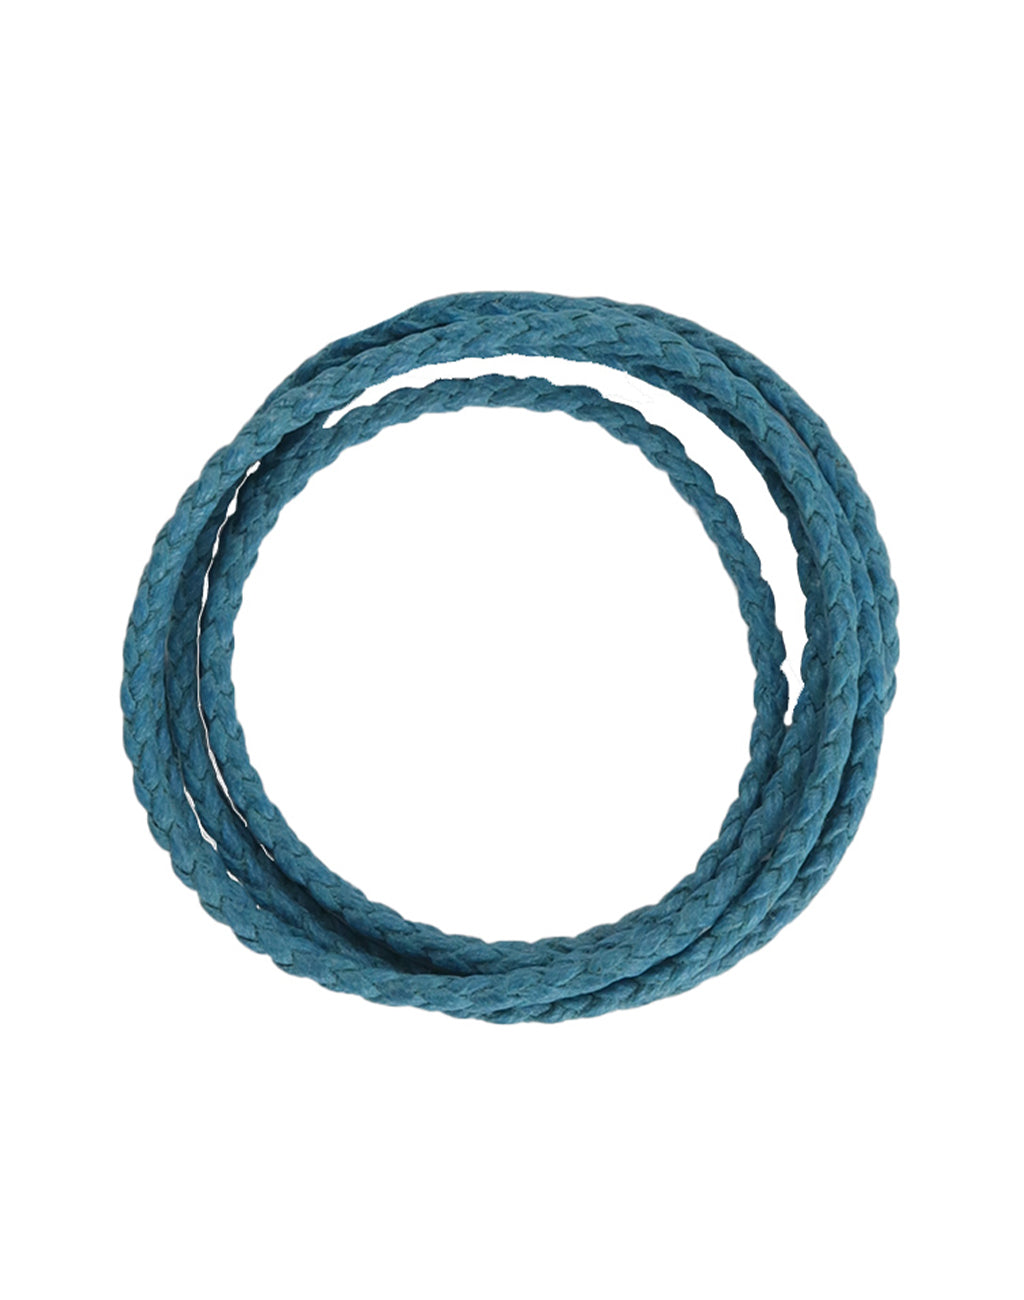 Teal Vegan Leather Braided Cord, 2mm, (9ft)